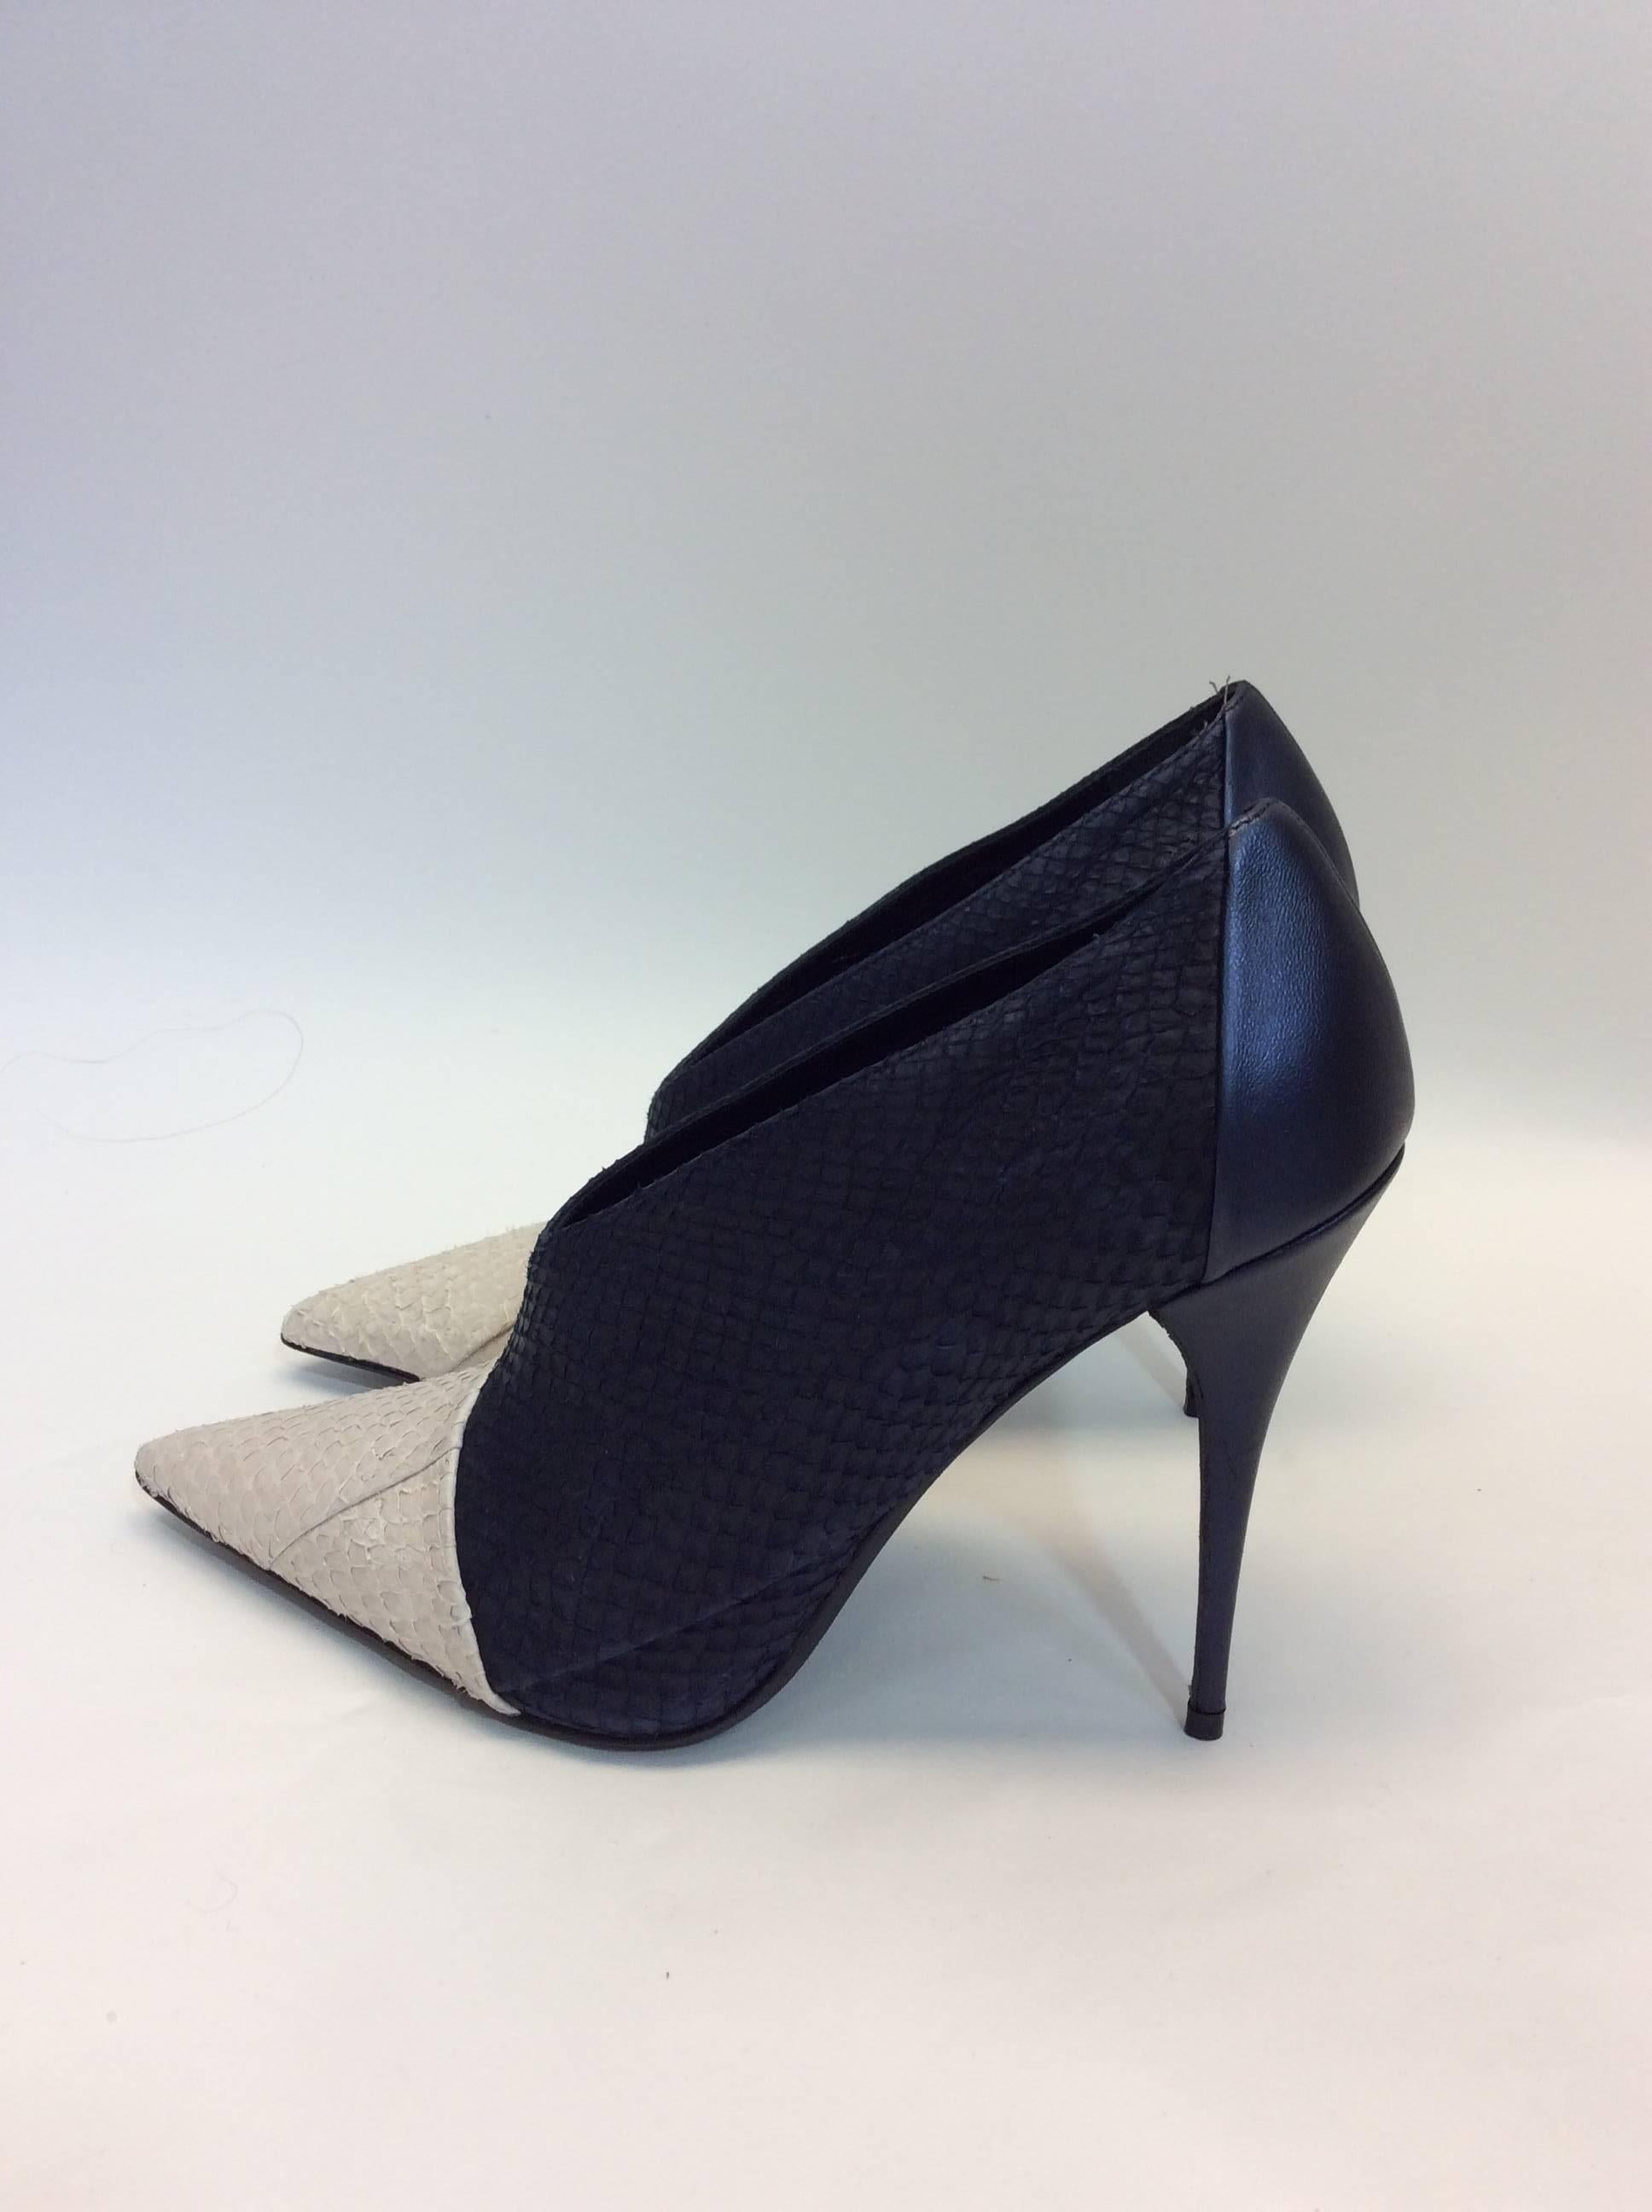 Narciso Rodriguez  Navy Bootie
$799
Size 39
Made in Italy
4.5 inch heel
Pointed toe, off white toe
